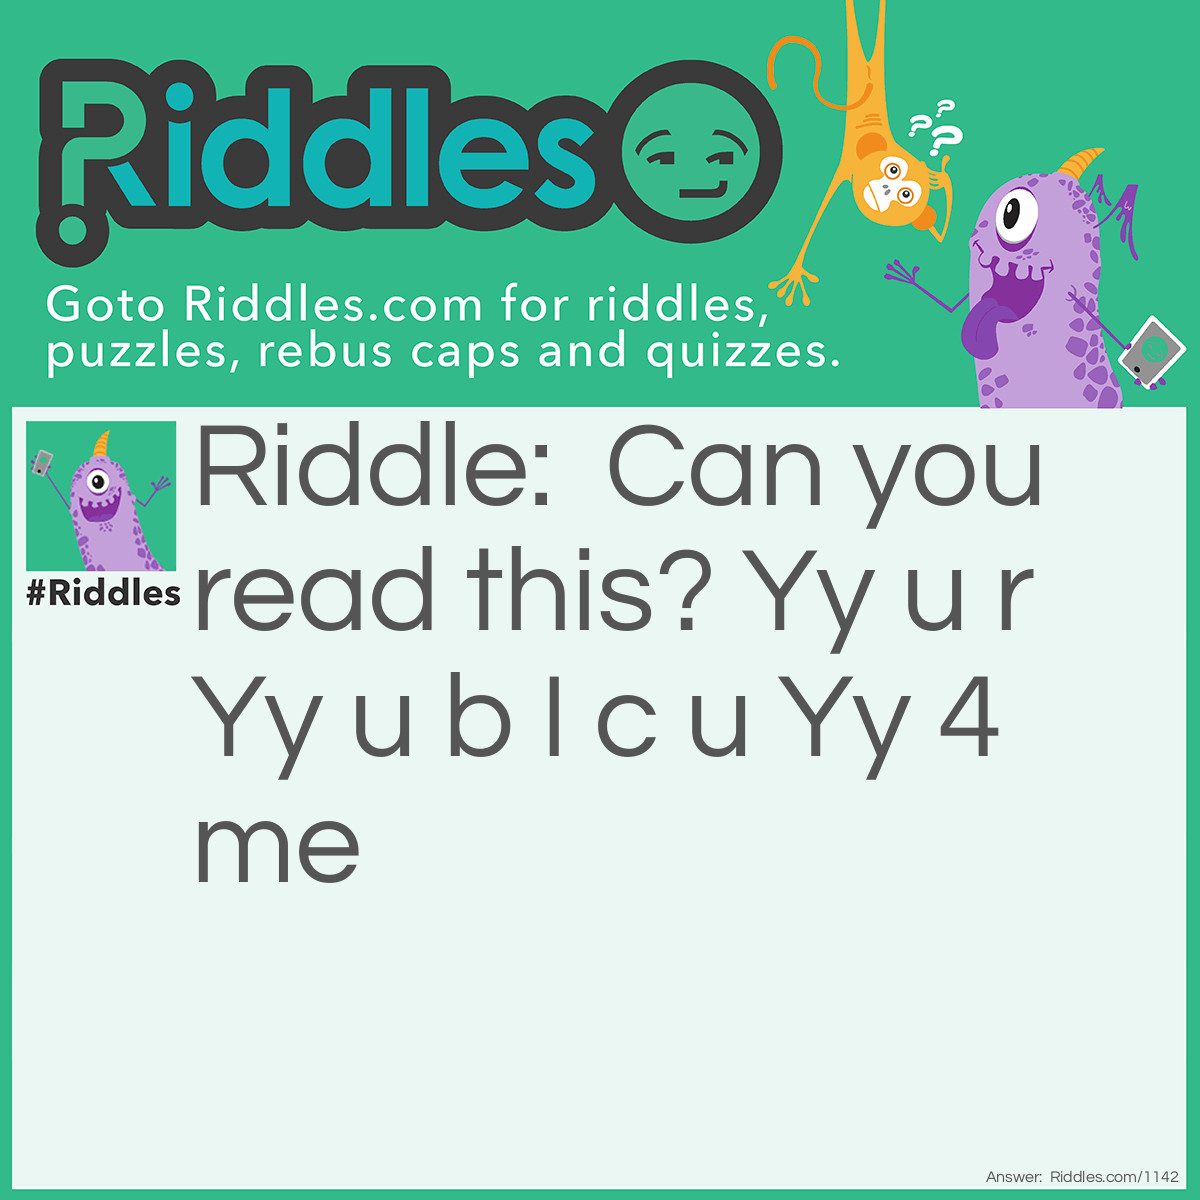 Riddle: Can you read this? Yy u r Yy u b I c u Yy 4 me Answer: Too wise you are, too wise you be, I see you too wise for me.